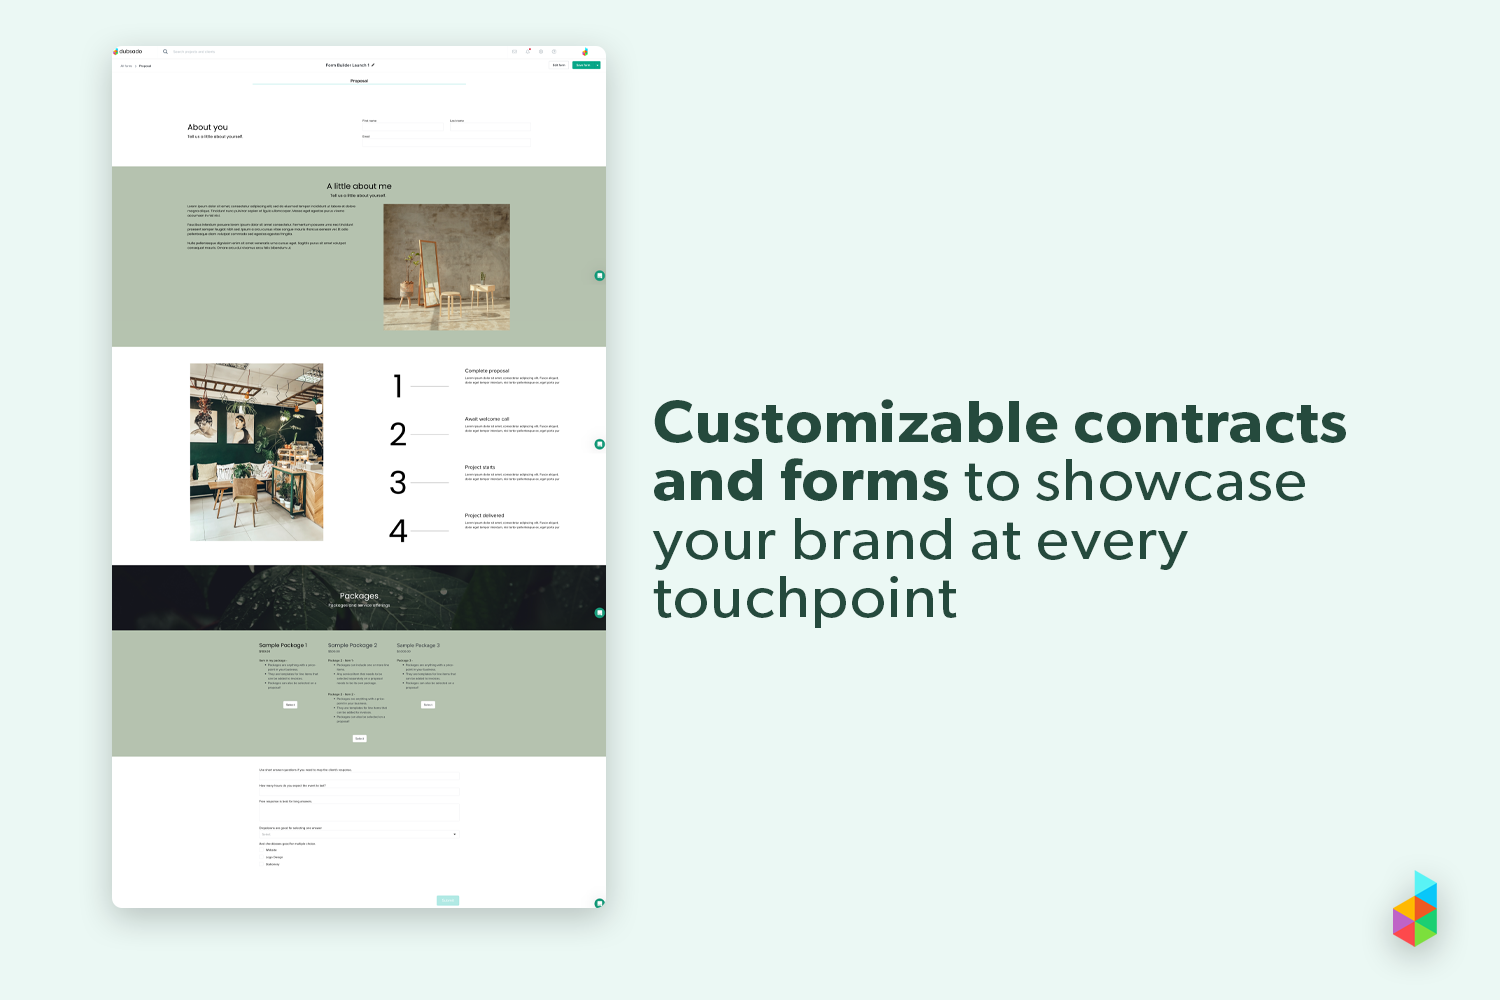 Dubsado Software - Text" Customizable contracts and forms to showcase your brand at every touchpoint." Image: Form with custom brand colors, photos, and packages.